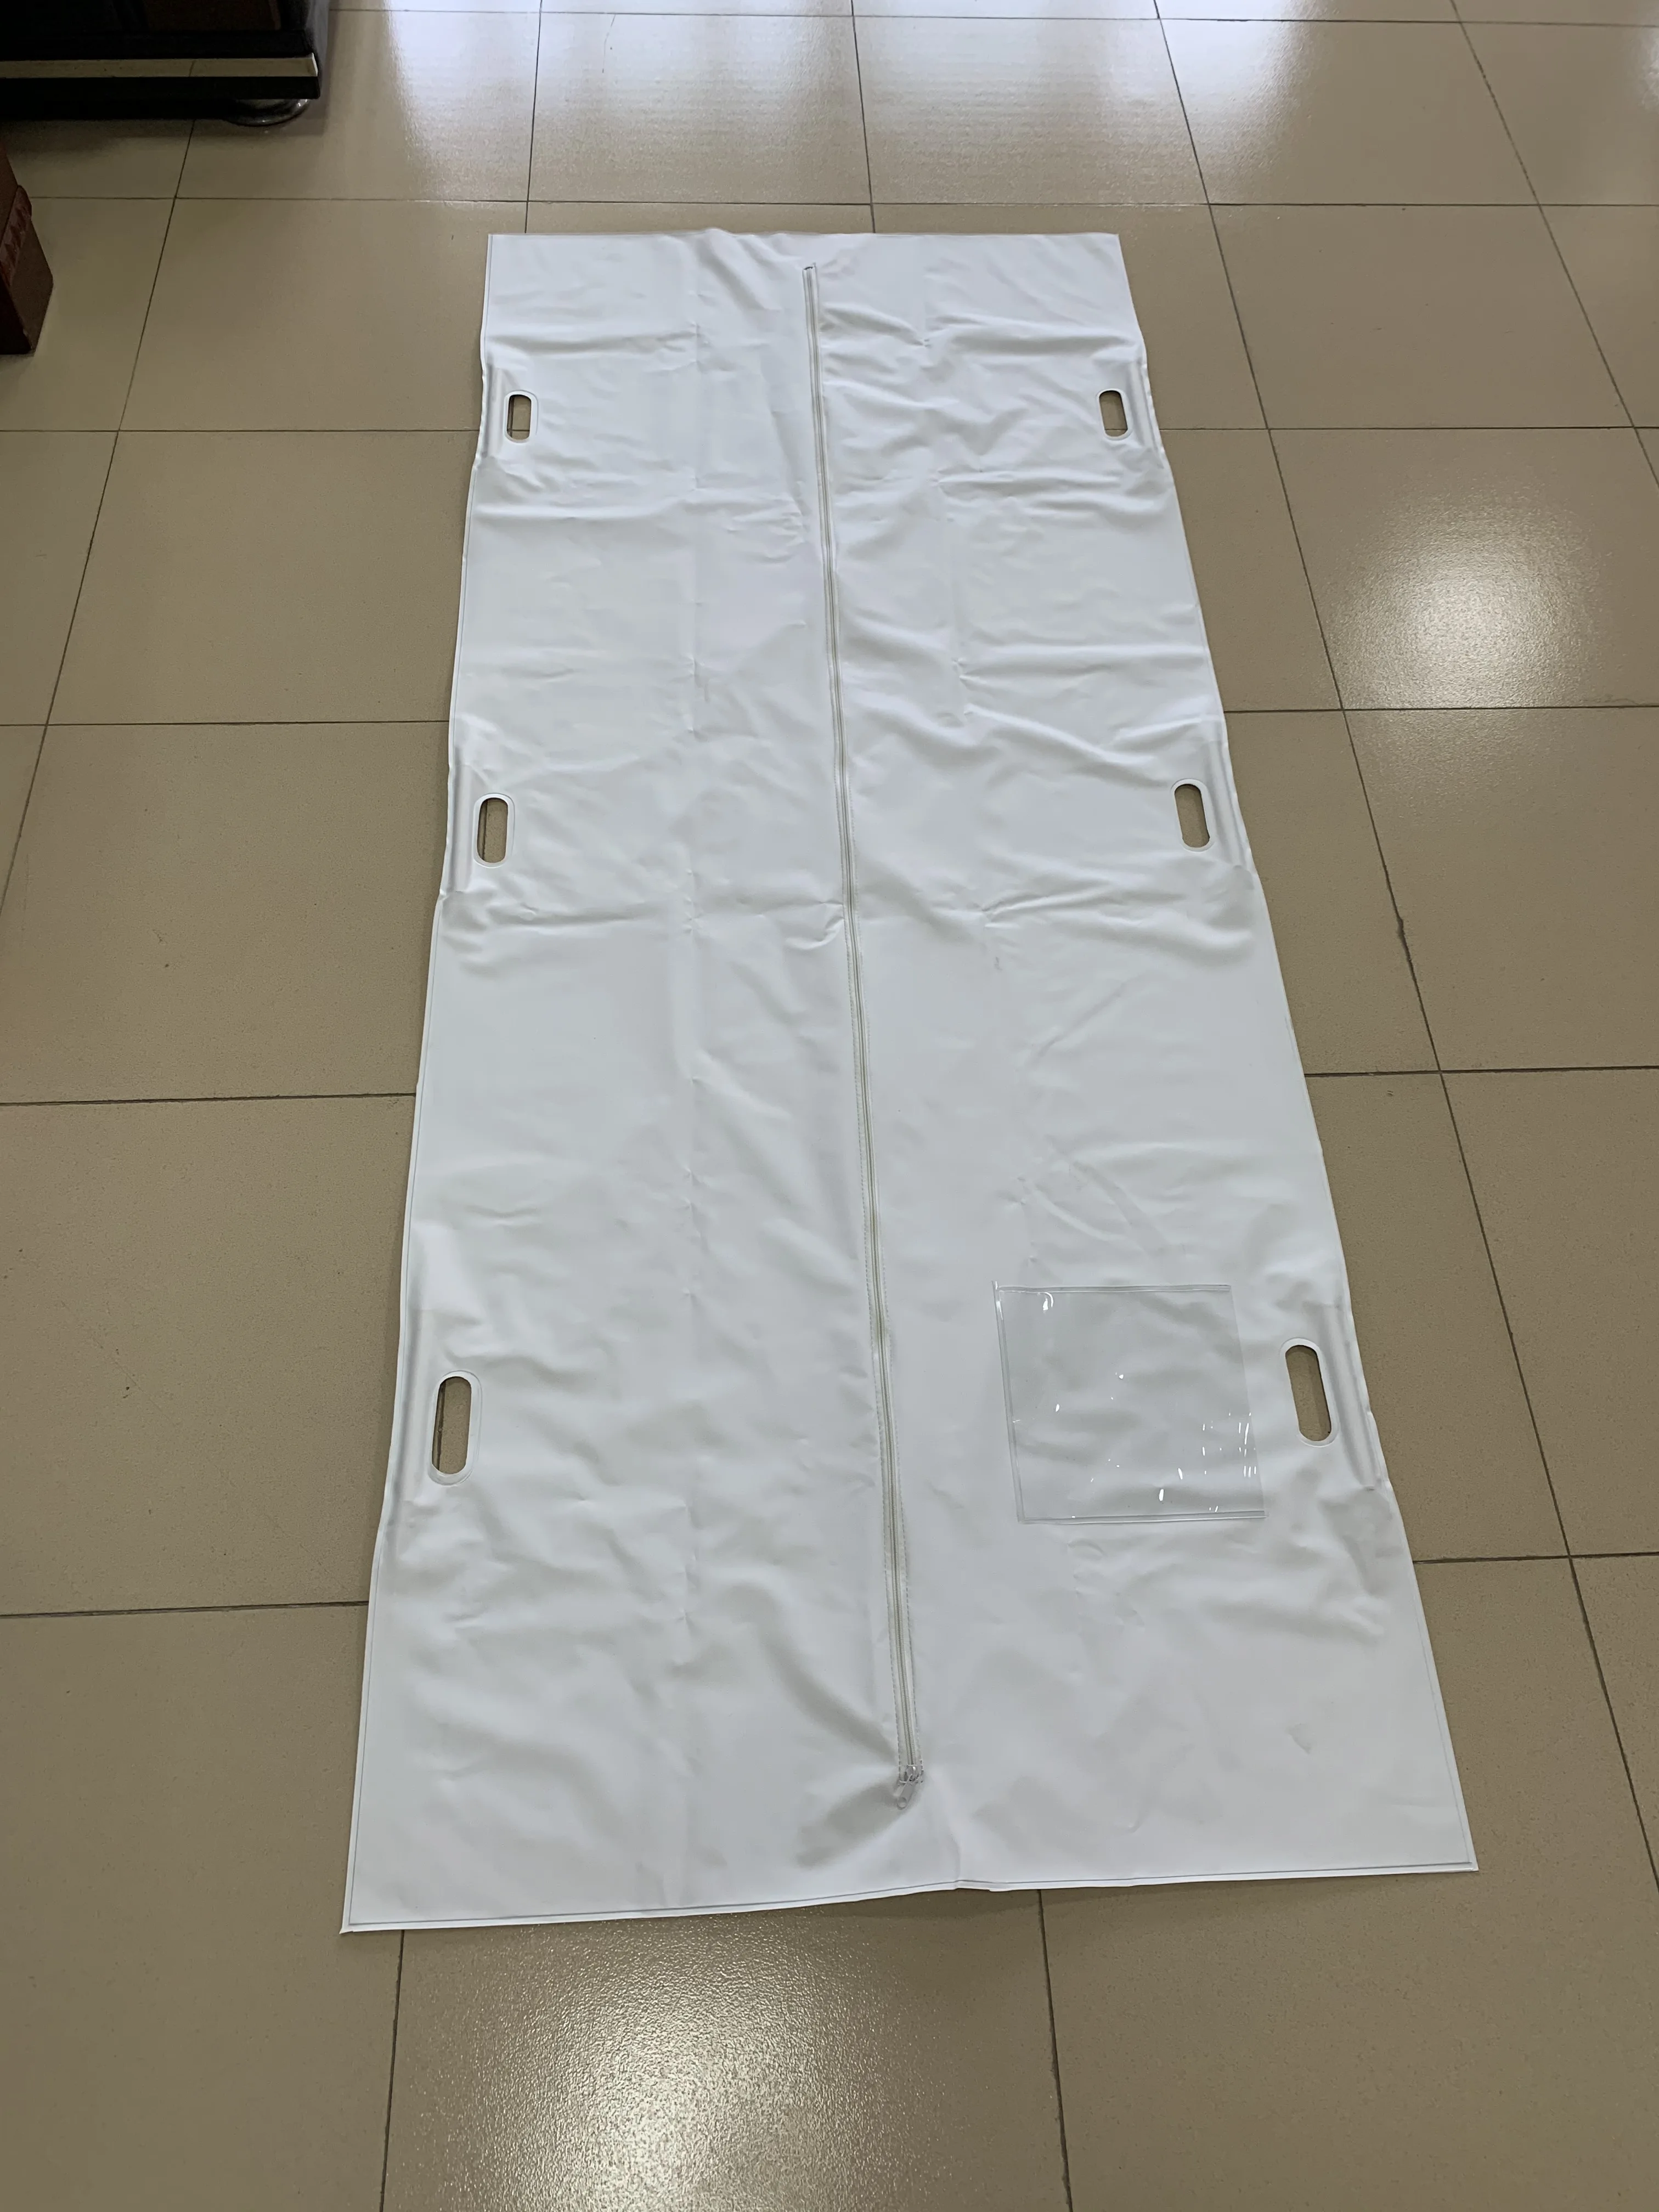 
CE Heavy Duty White Corpse Bag PVC Post Mortem Bags Leichensack Peva Body Bags For Dead Bodies With 6 Carry Handles 